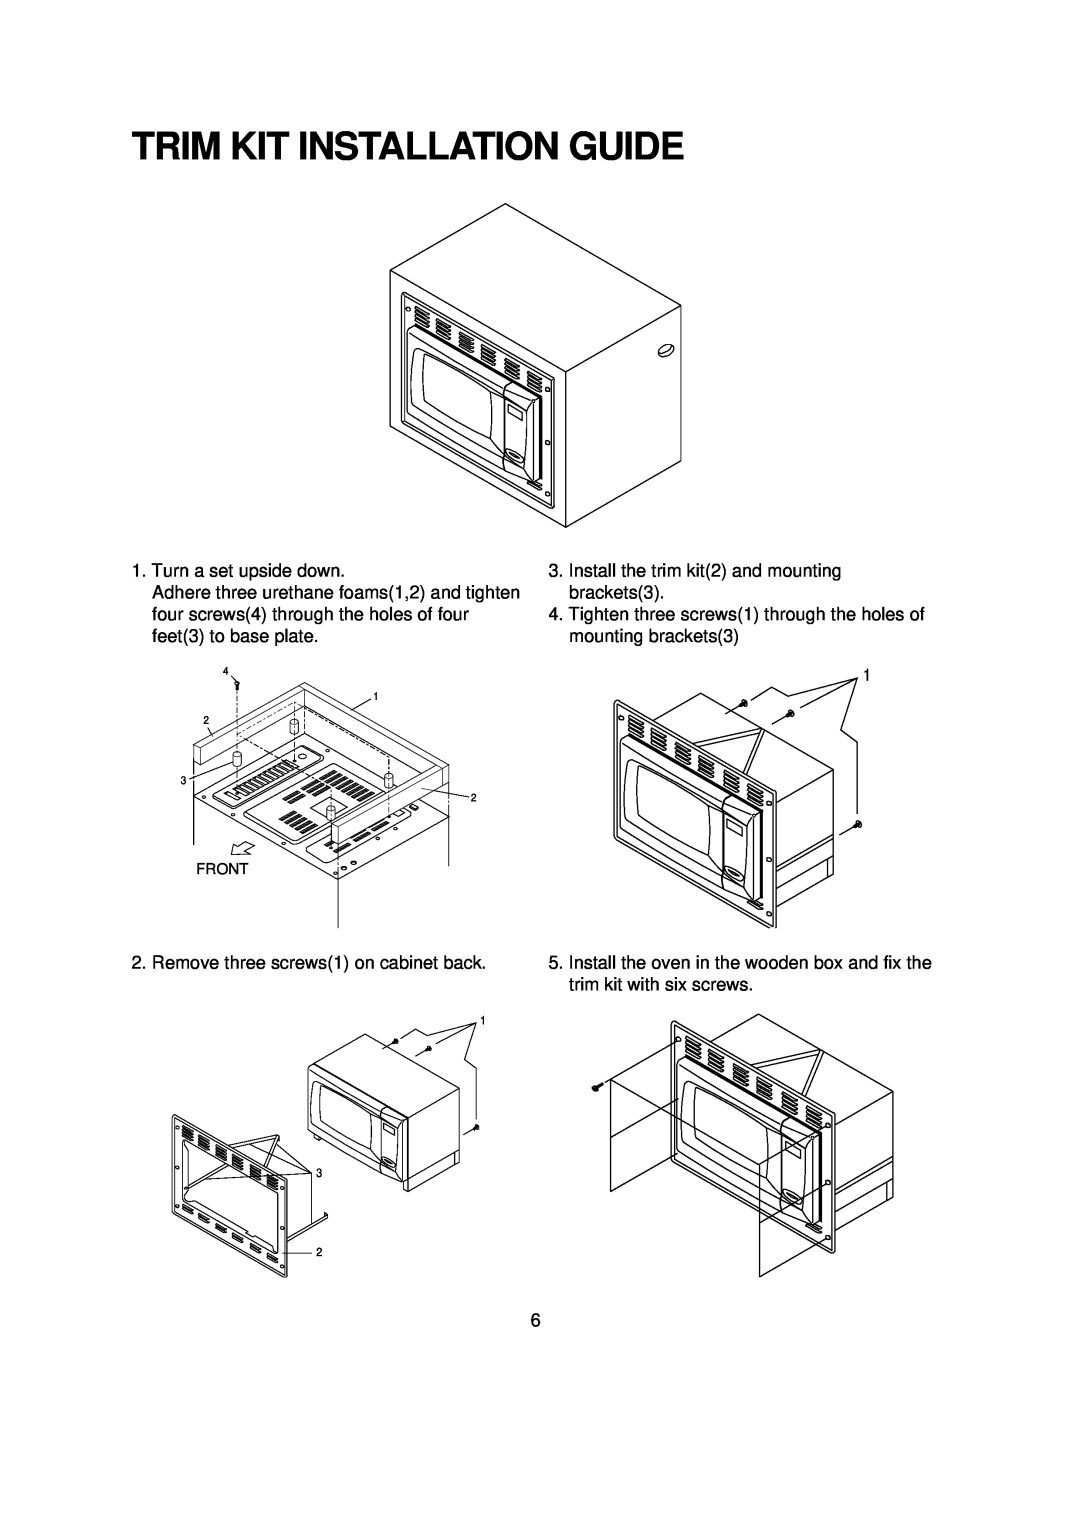 Magic Chef MCD990ARS Trim Kit Installation Guide, Turn a set upside down, Install the trim kit2 and mounting brackets3 